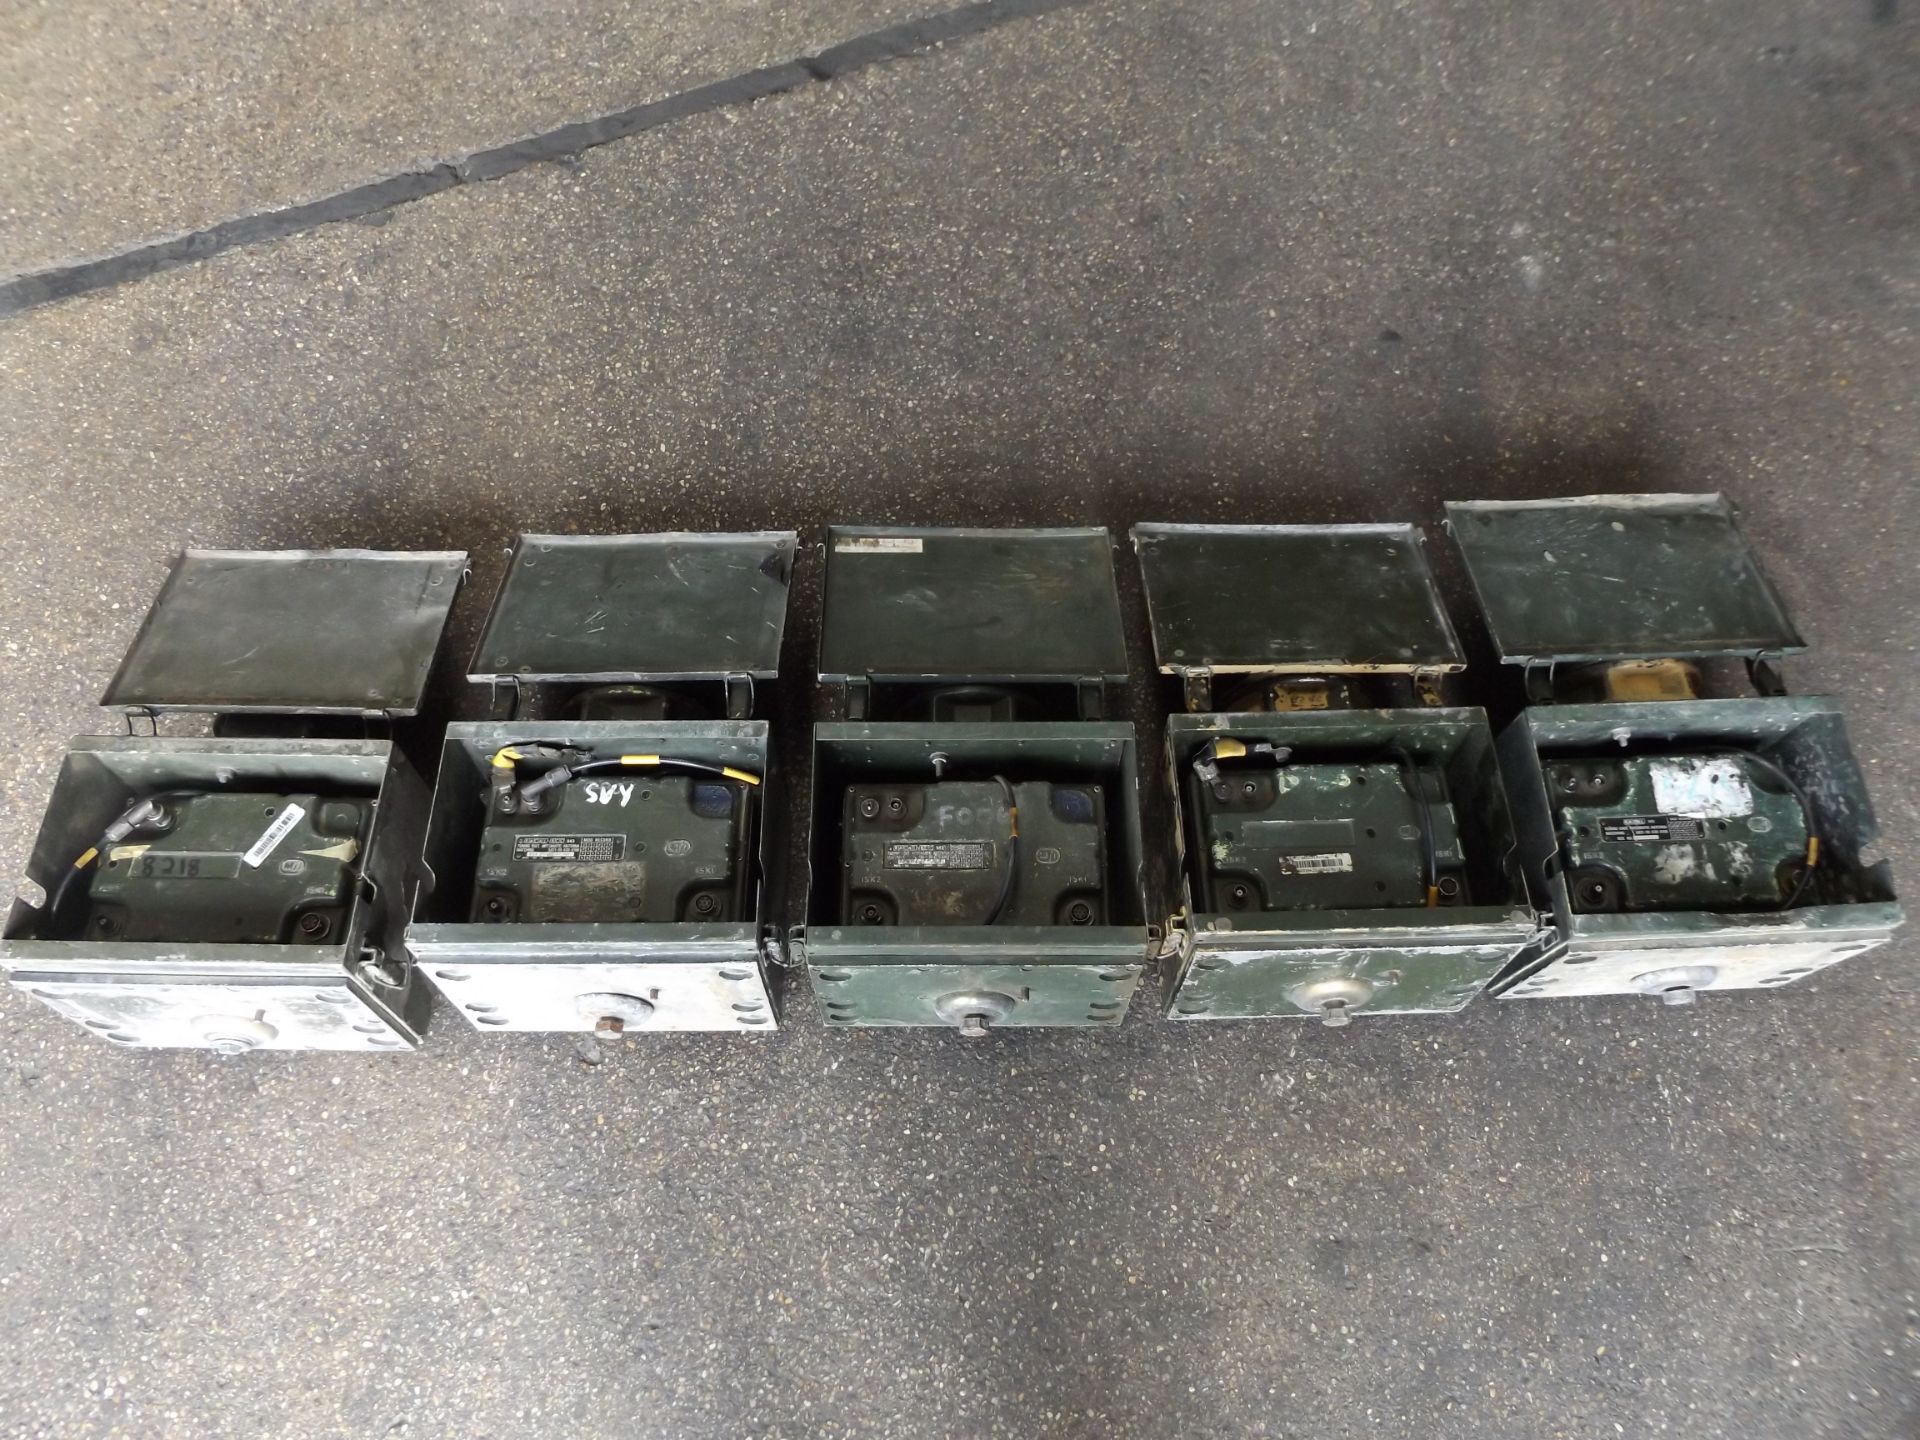 5 x Land Rover Wing Antenna Boxes ATU Boxes Complete with Aerial Bases and Tuaam's - Image 2 of 6